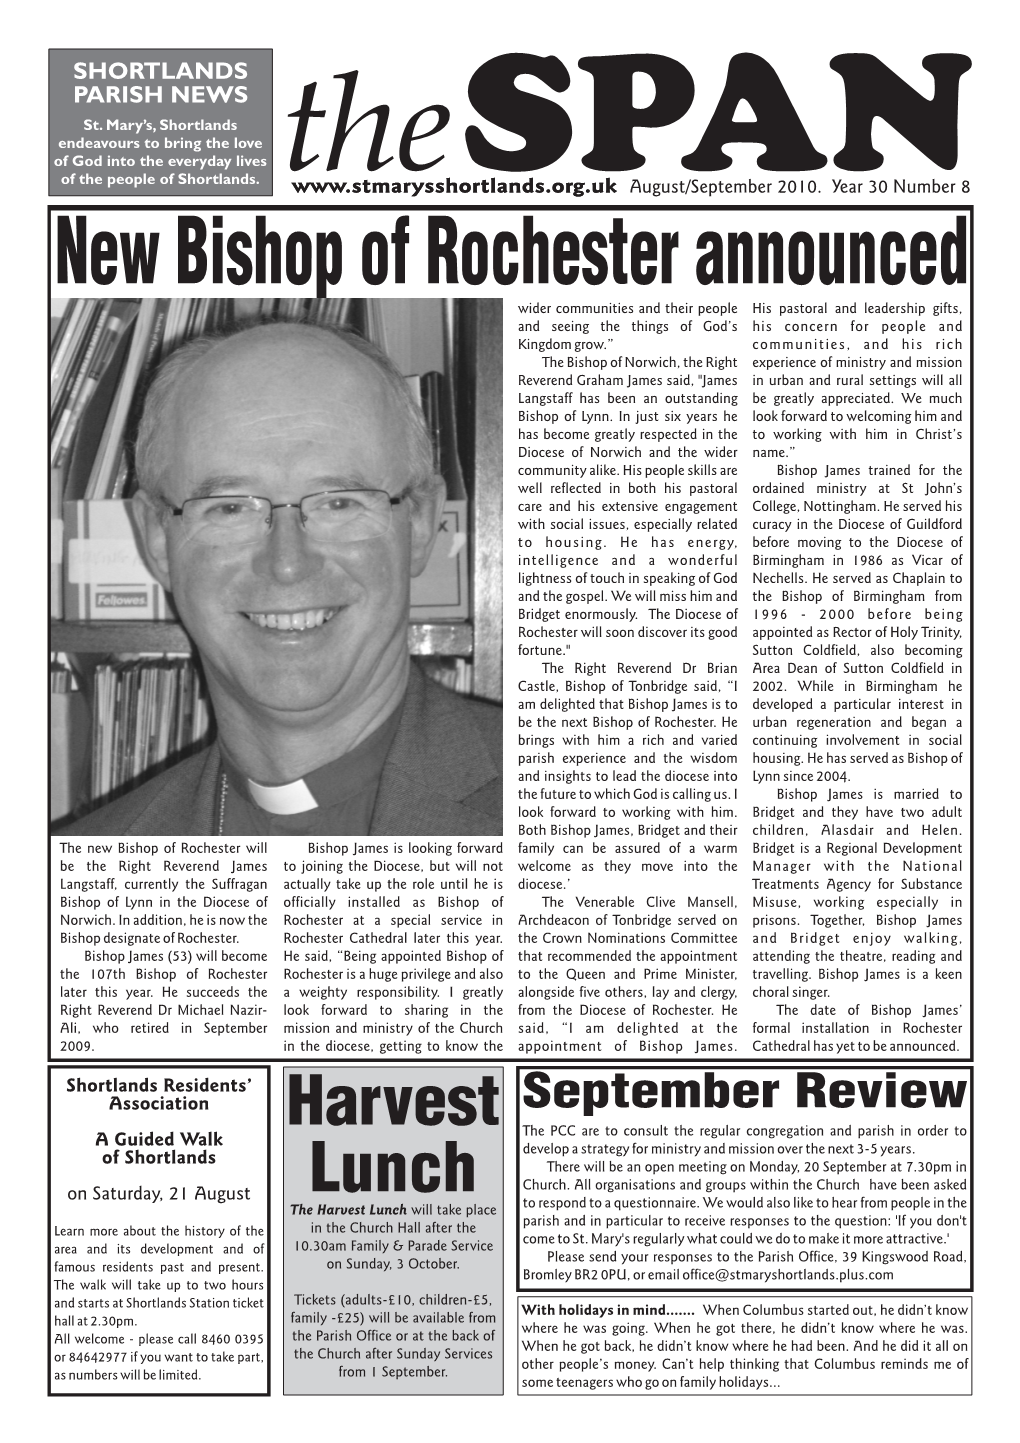 New Bishop of Rochester Announced